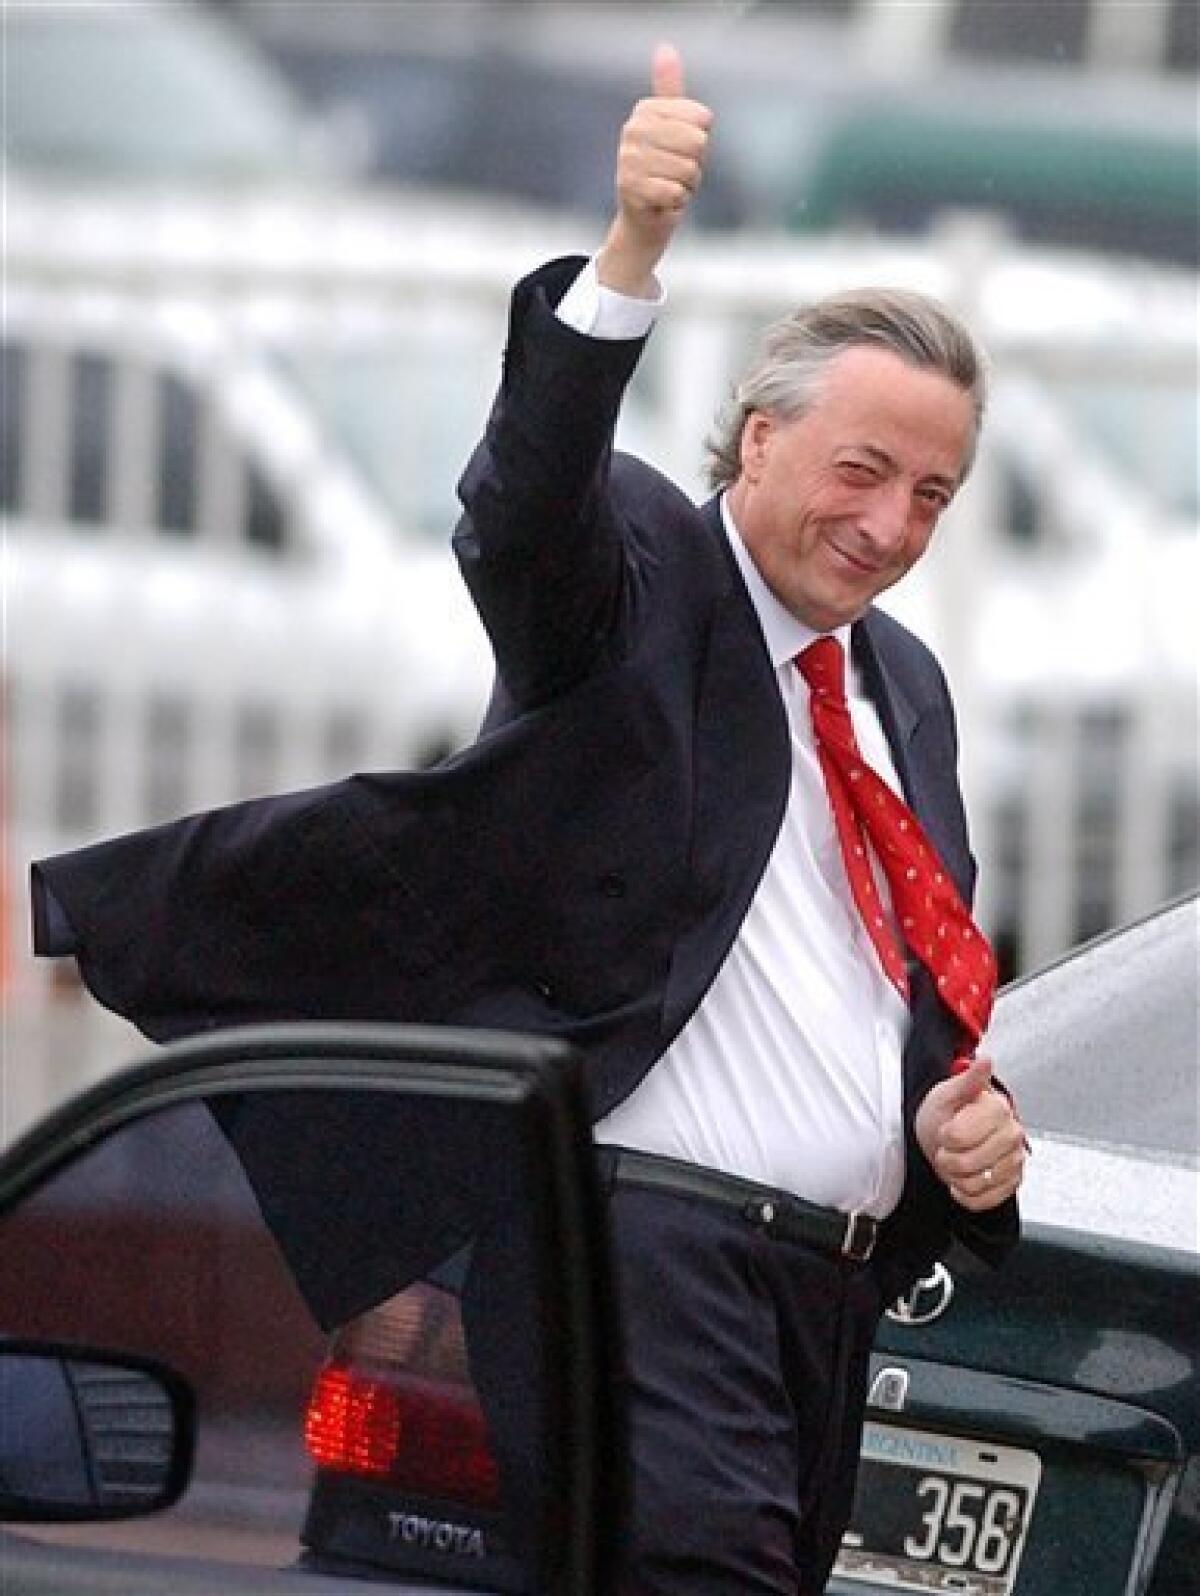 FILE - In this Oct. 24, 2005 file photo, Argentina's President Nestor Kirchner gives a thumbs-up as he arrives to the government house in Buenos Aires, Argentina. Kirchner, who served as Argentina's president from 2003-2007, died on Wednesday Oct. 27, 2010 after suffering heart attacks at age 60. (AP Photo/Leonardo Zavattaro, Telam, File)